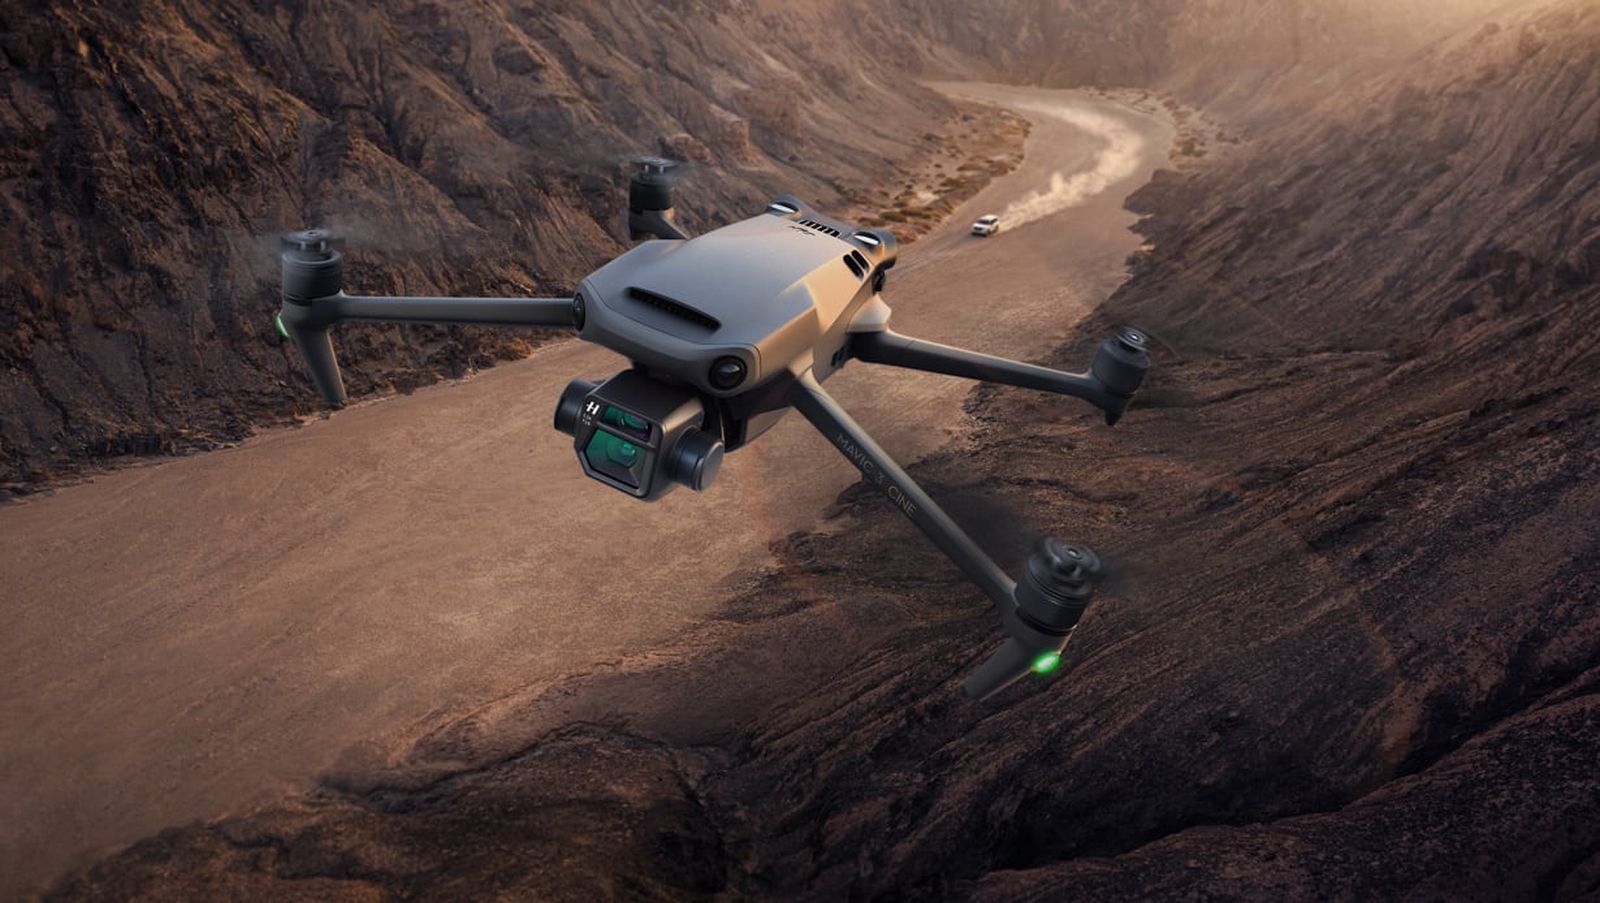 DJI Launches New Mavic 3 Drone With Longer Flight Time, Improved Cameras and New Safety Features